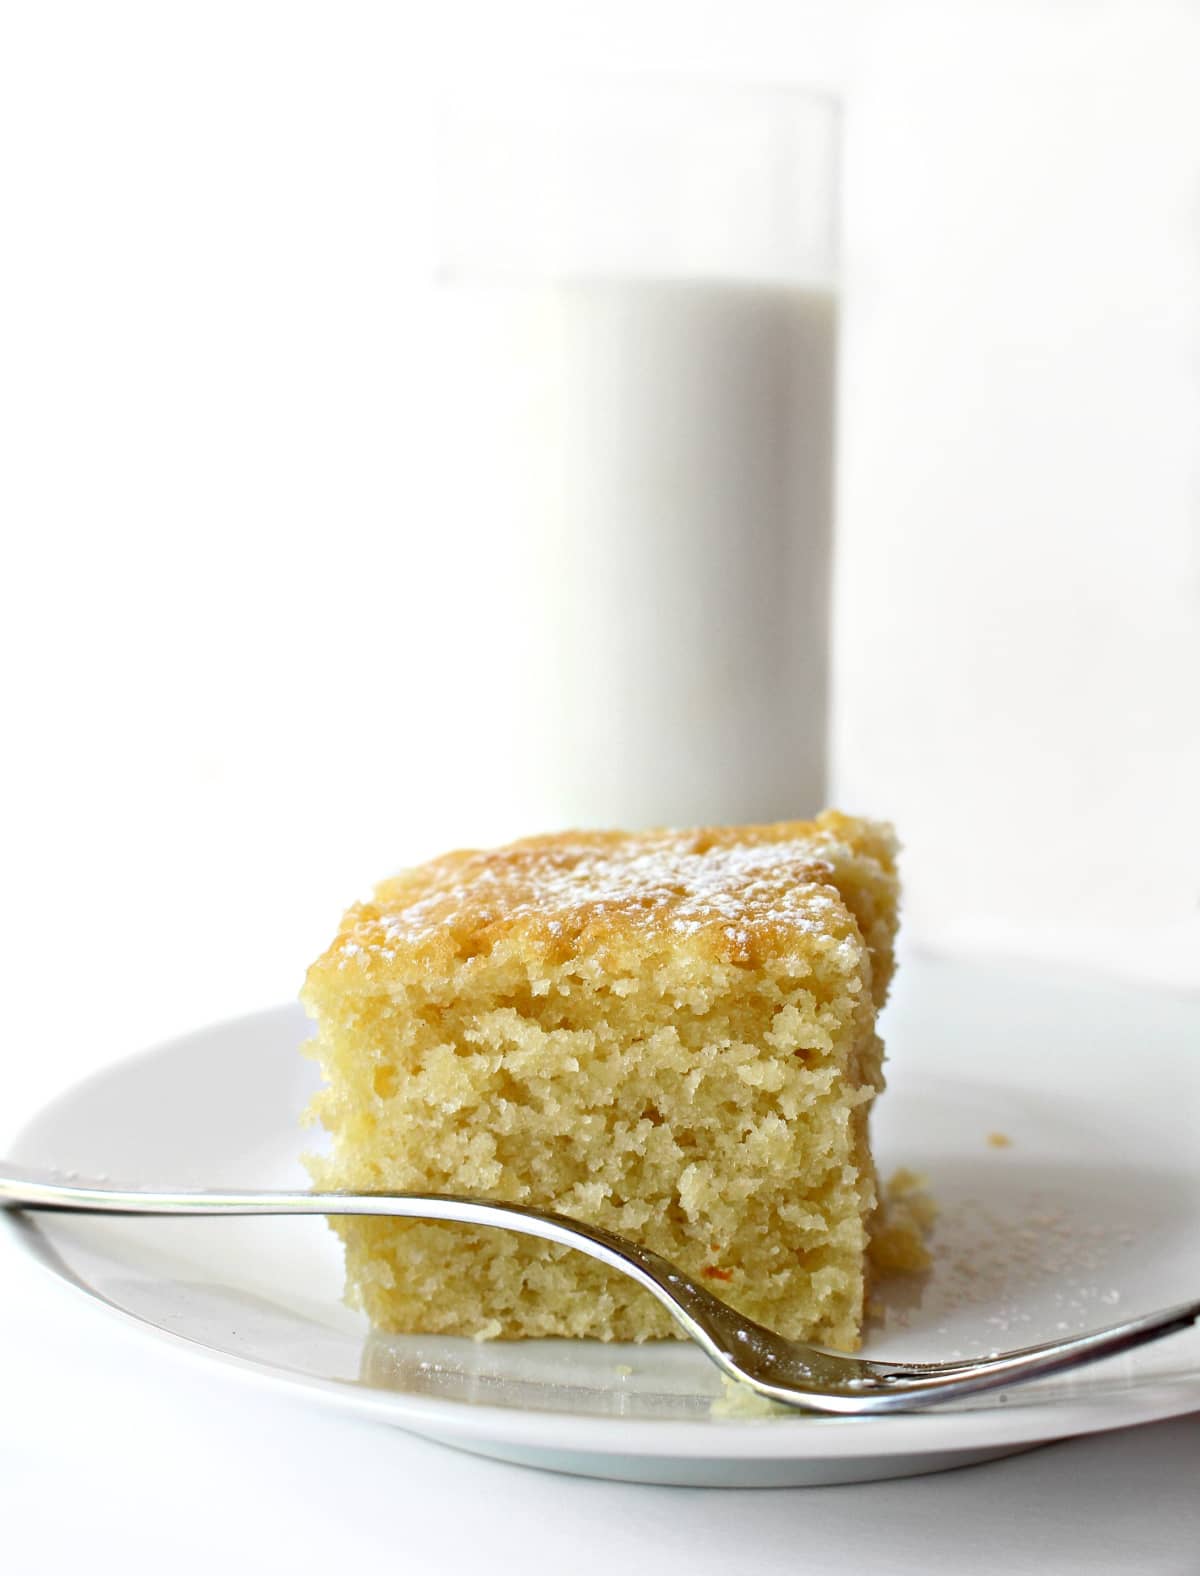 Coconut Milk Snack Cake square on a plate with a fork and a glass of milk in the background.